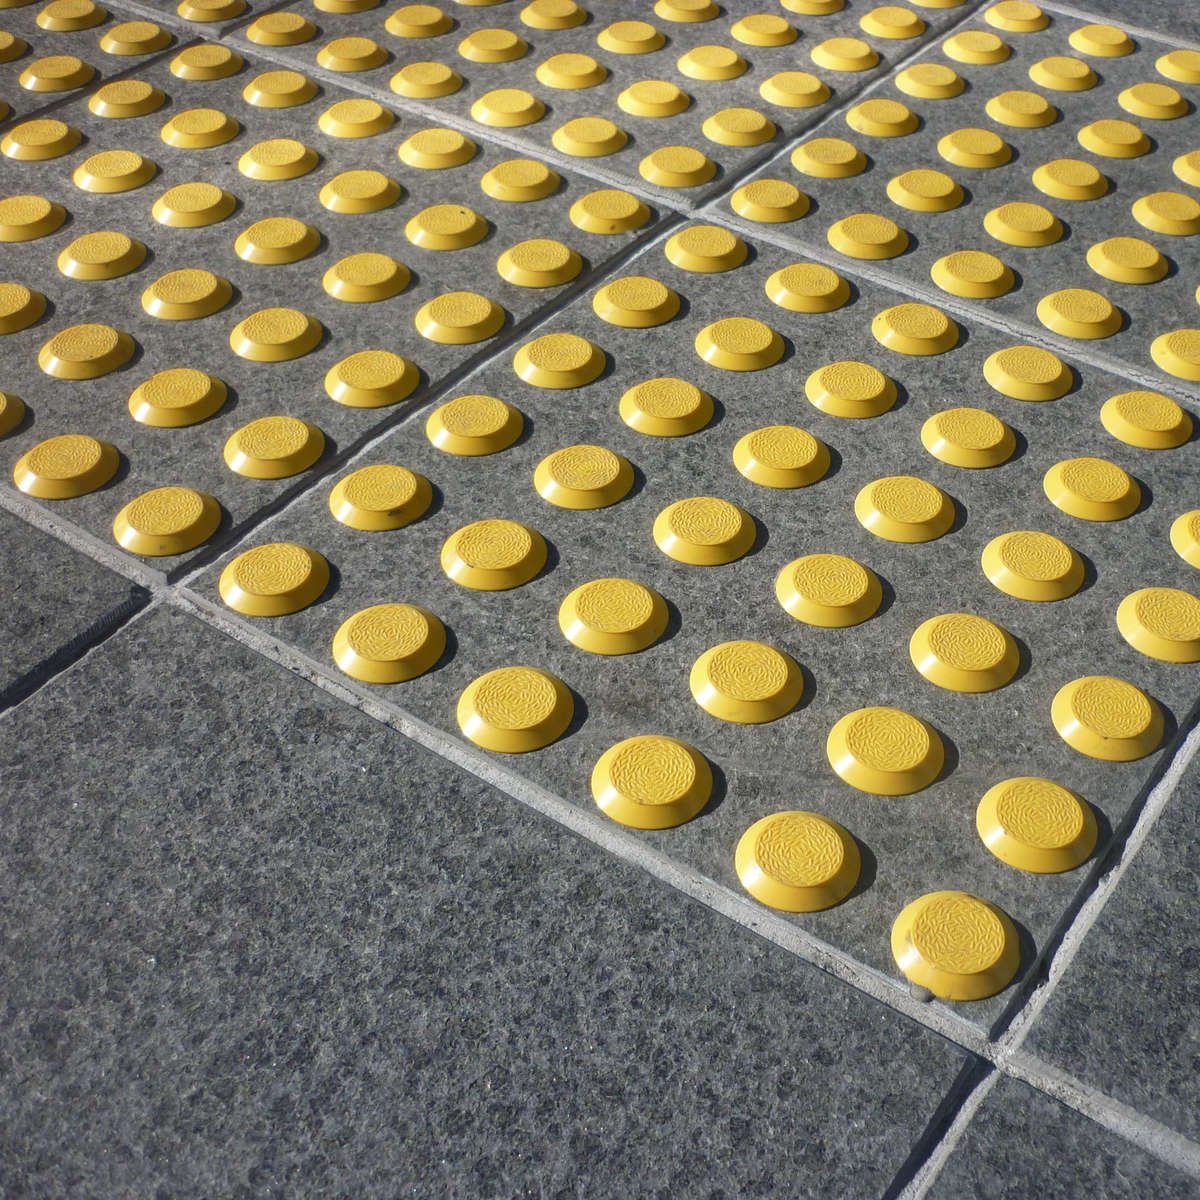 A close-up of TacPro yellow polyurethane tactile indicators installed on bluestone tiles at a courtesy pedestrian crossing.